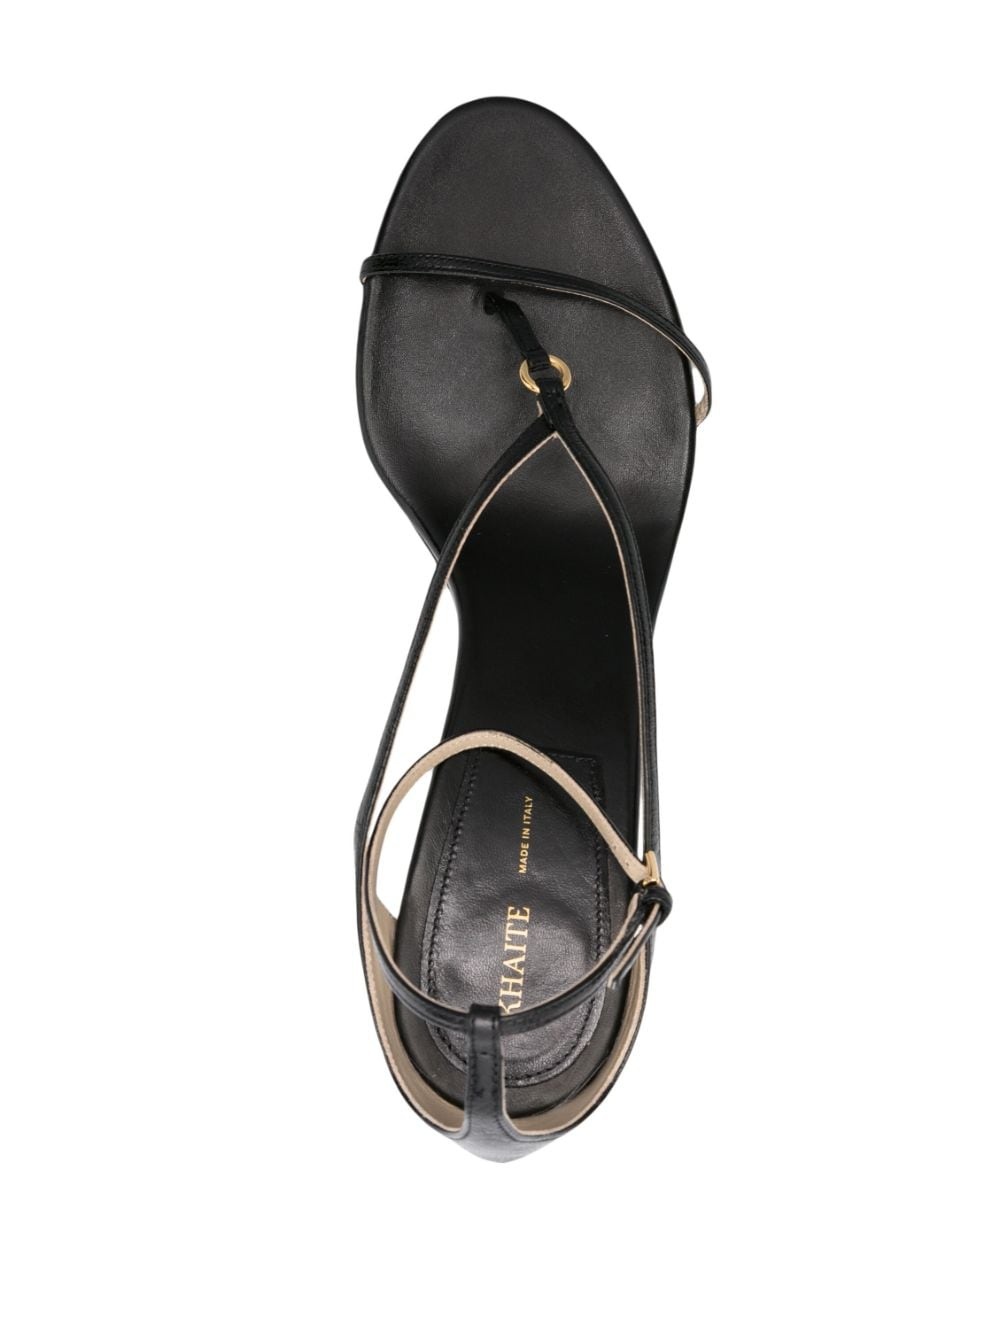 Marion 90mm wedge sandals - 4